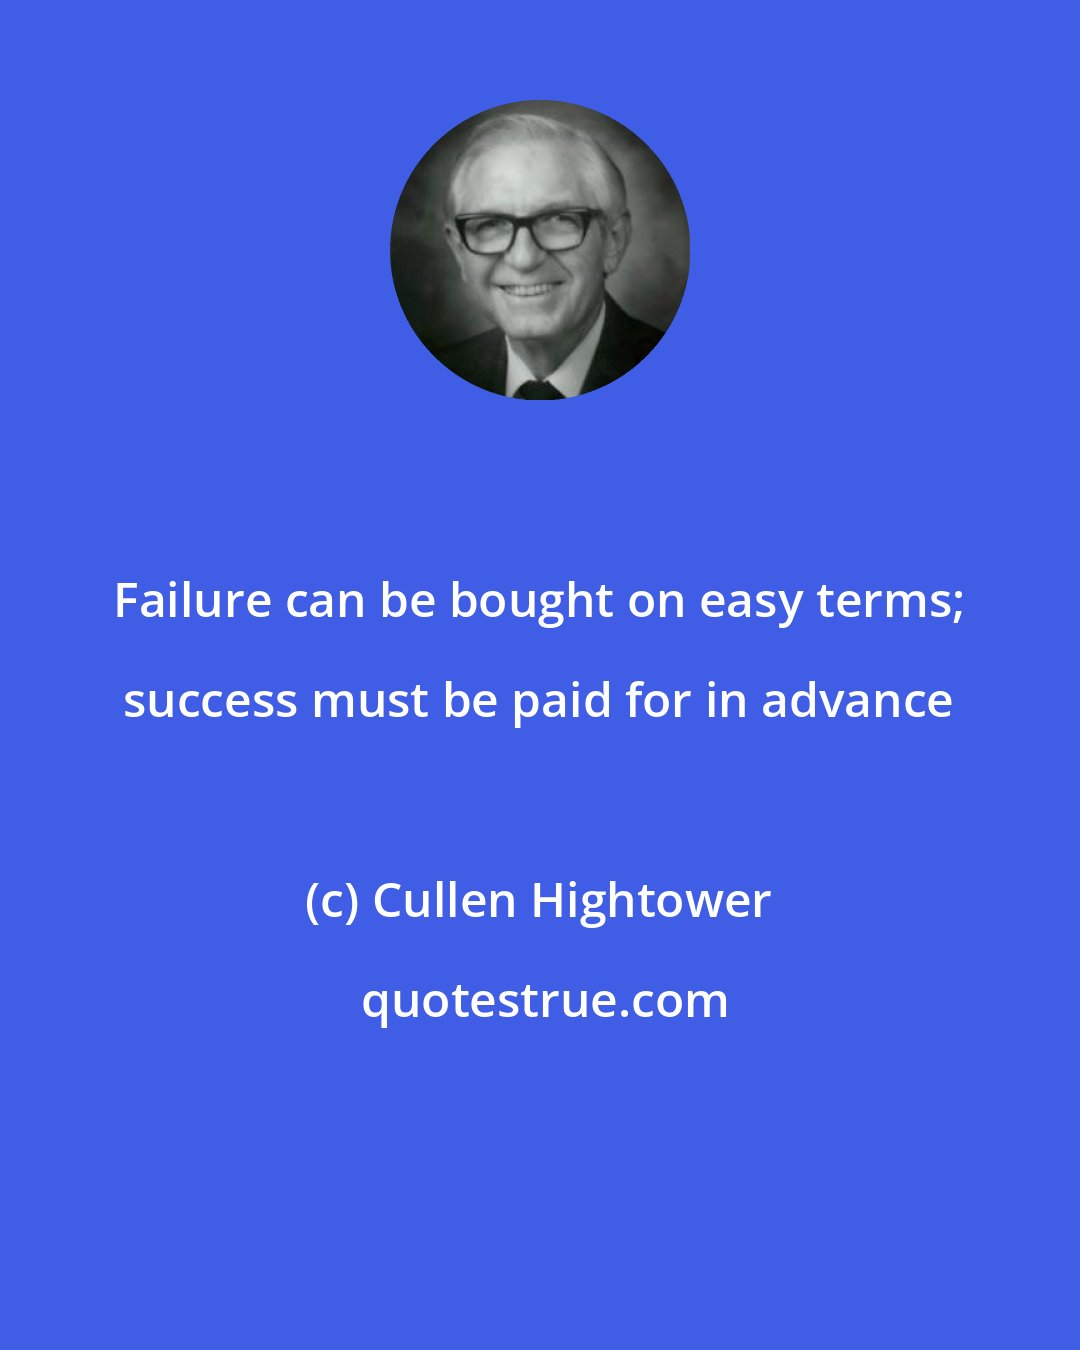 Cullen Hightower: Failure can be bought on easy terms; success must be paid for in advance